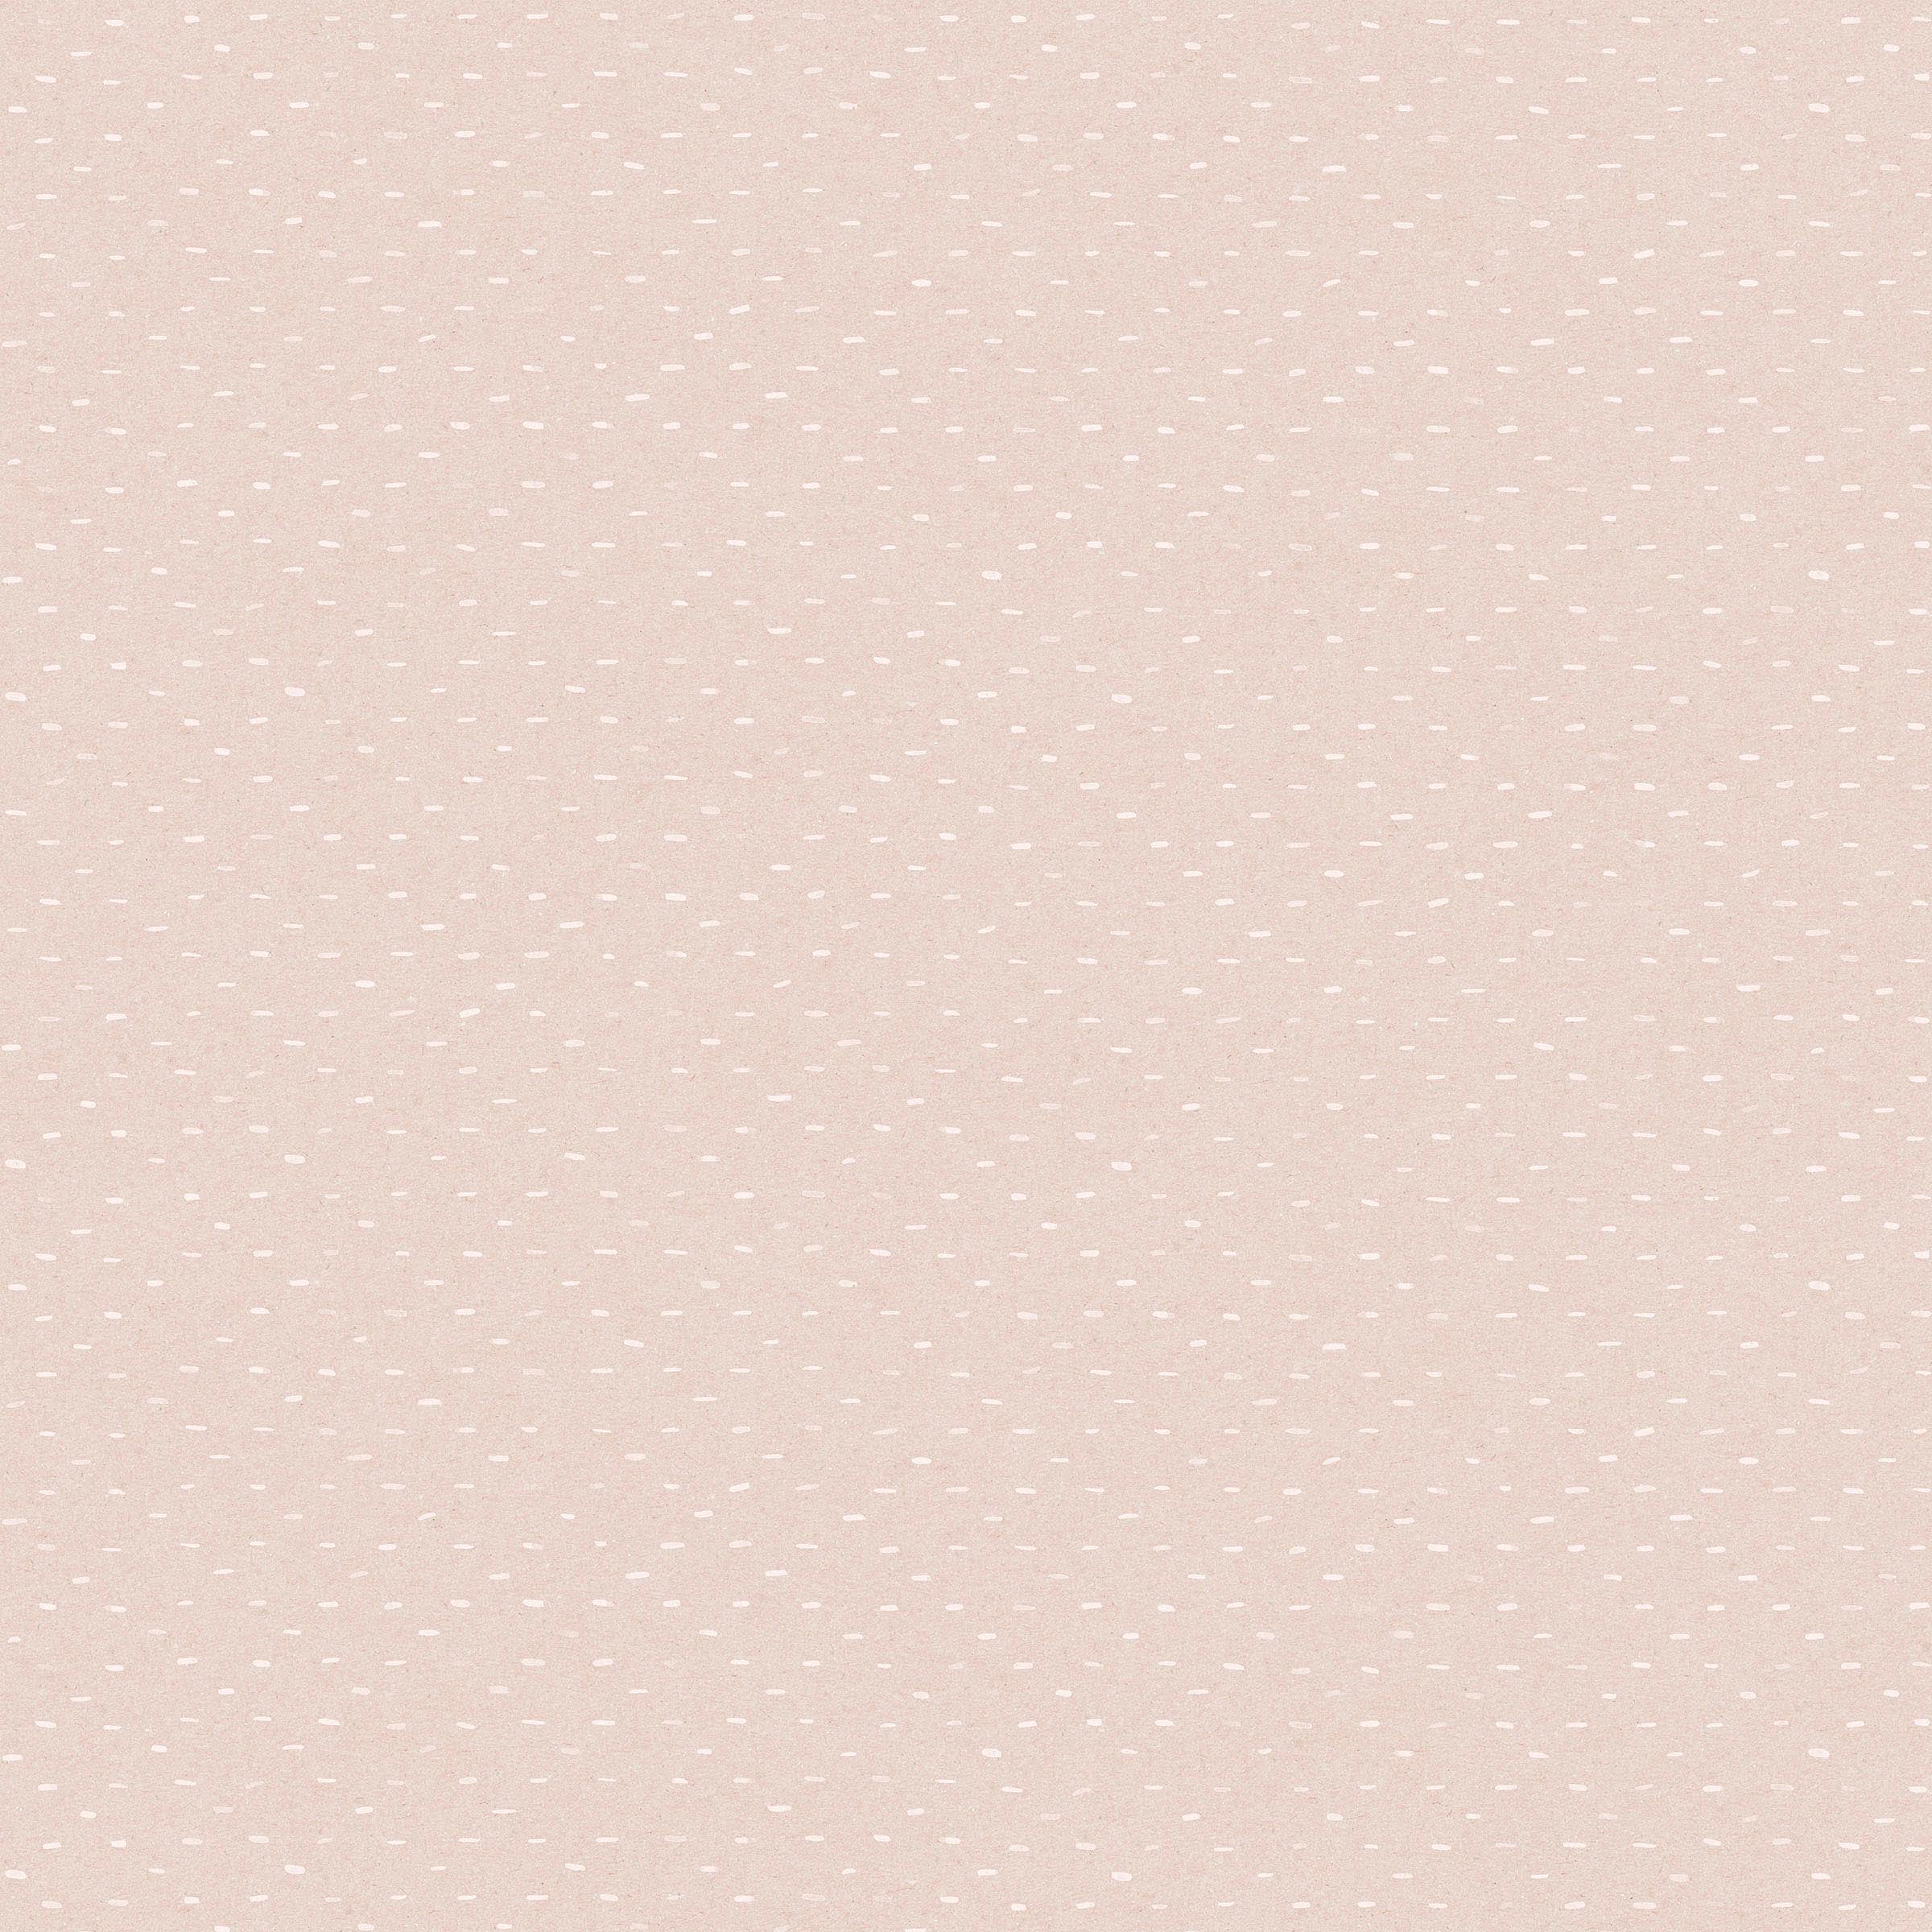 Detail of wallpaper in a dotted diamond grid in white on a light pink field.